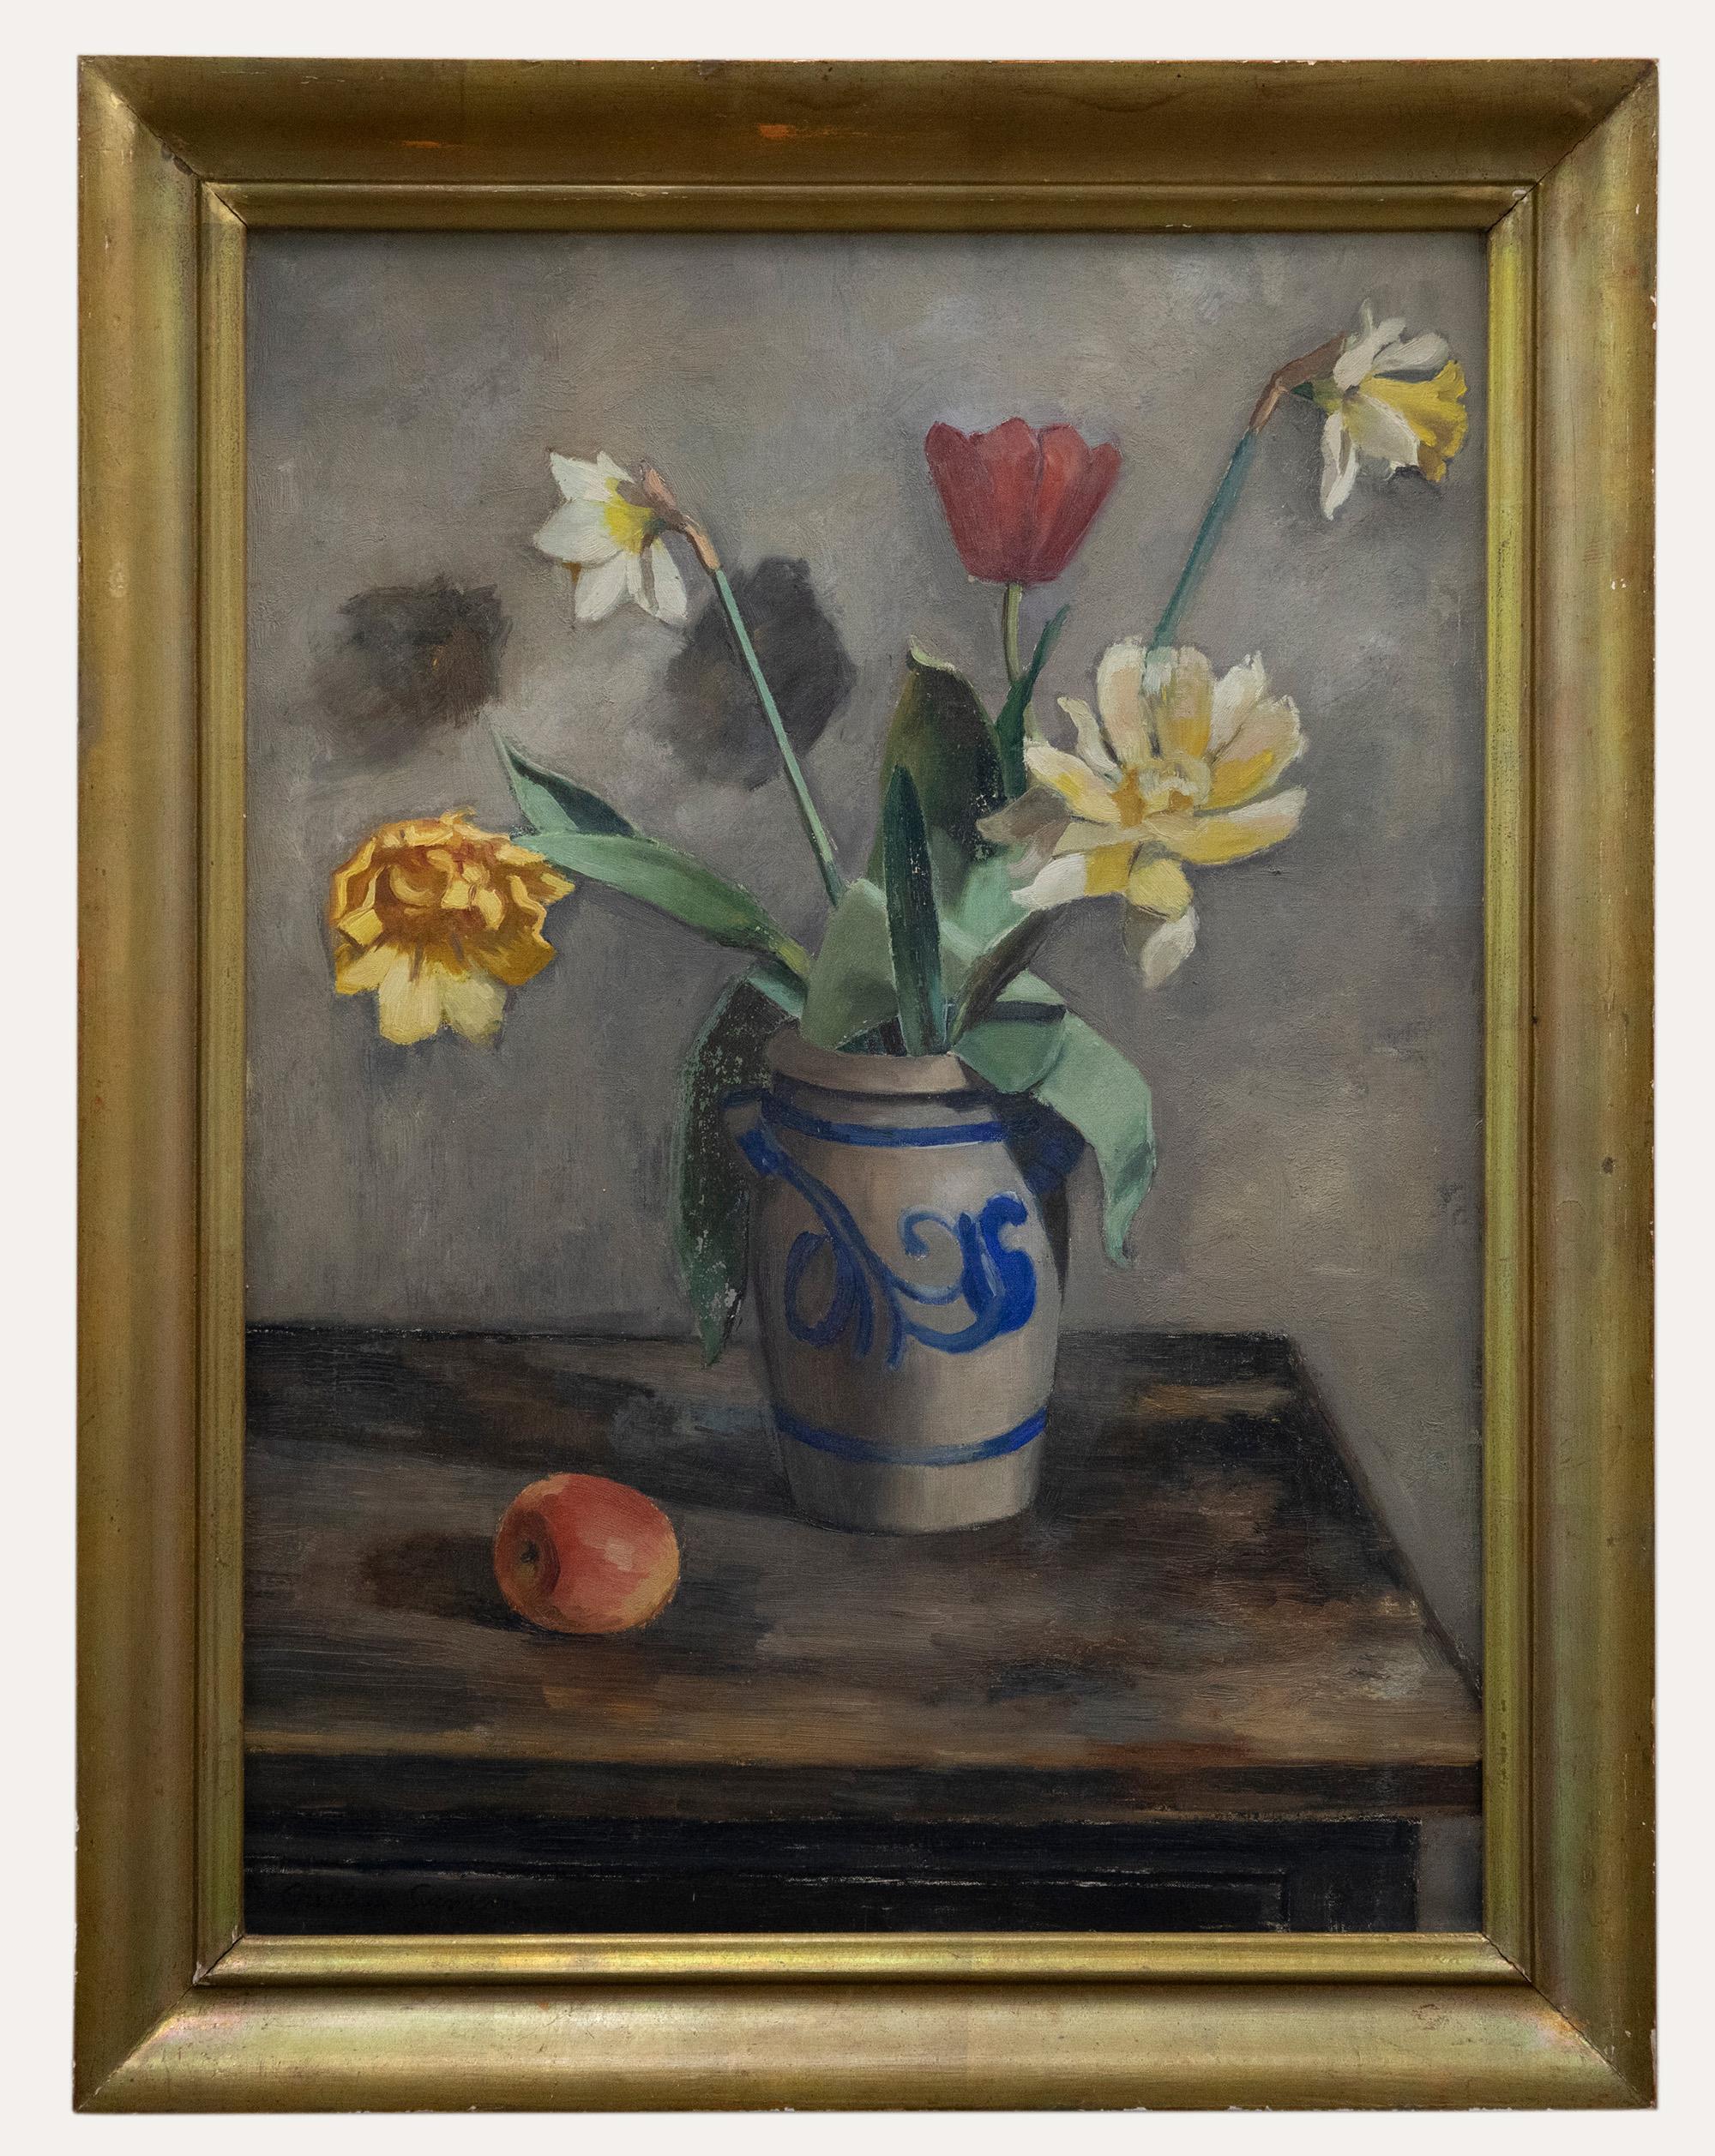 Unknown Still-Life Painting - Gustav Svensson (1893-1957) - Mid 20th Century Oil, Daffodils and Tulips